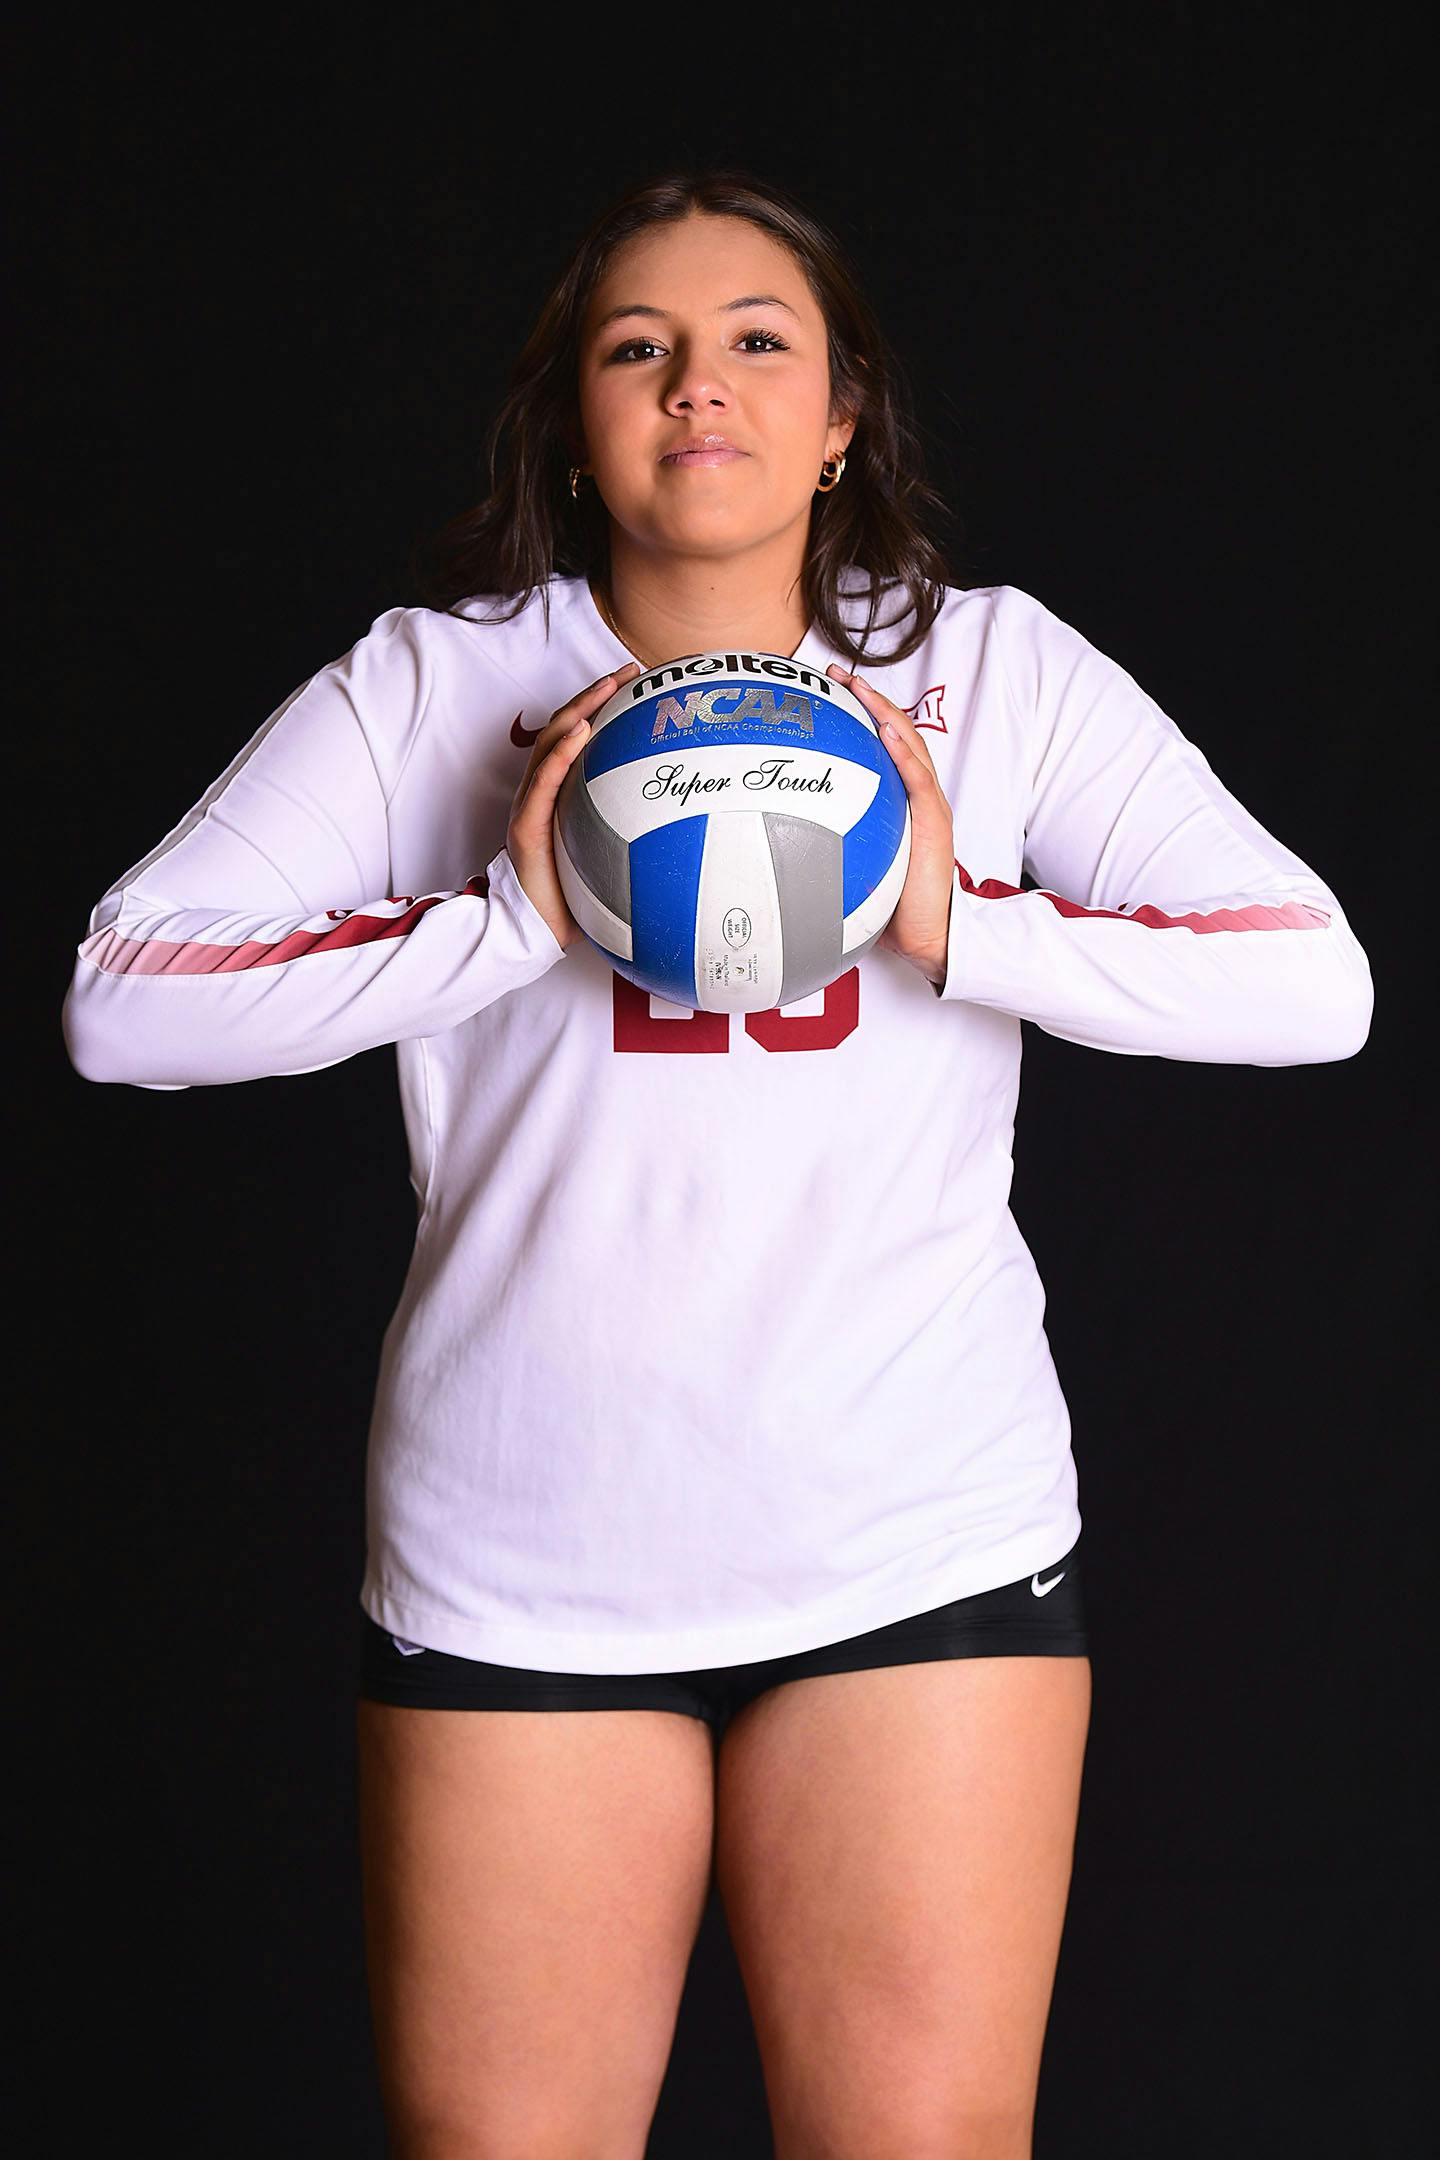 Mele's fourth picture wearing an OU jersey